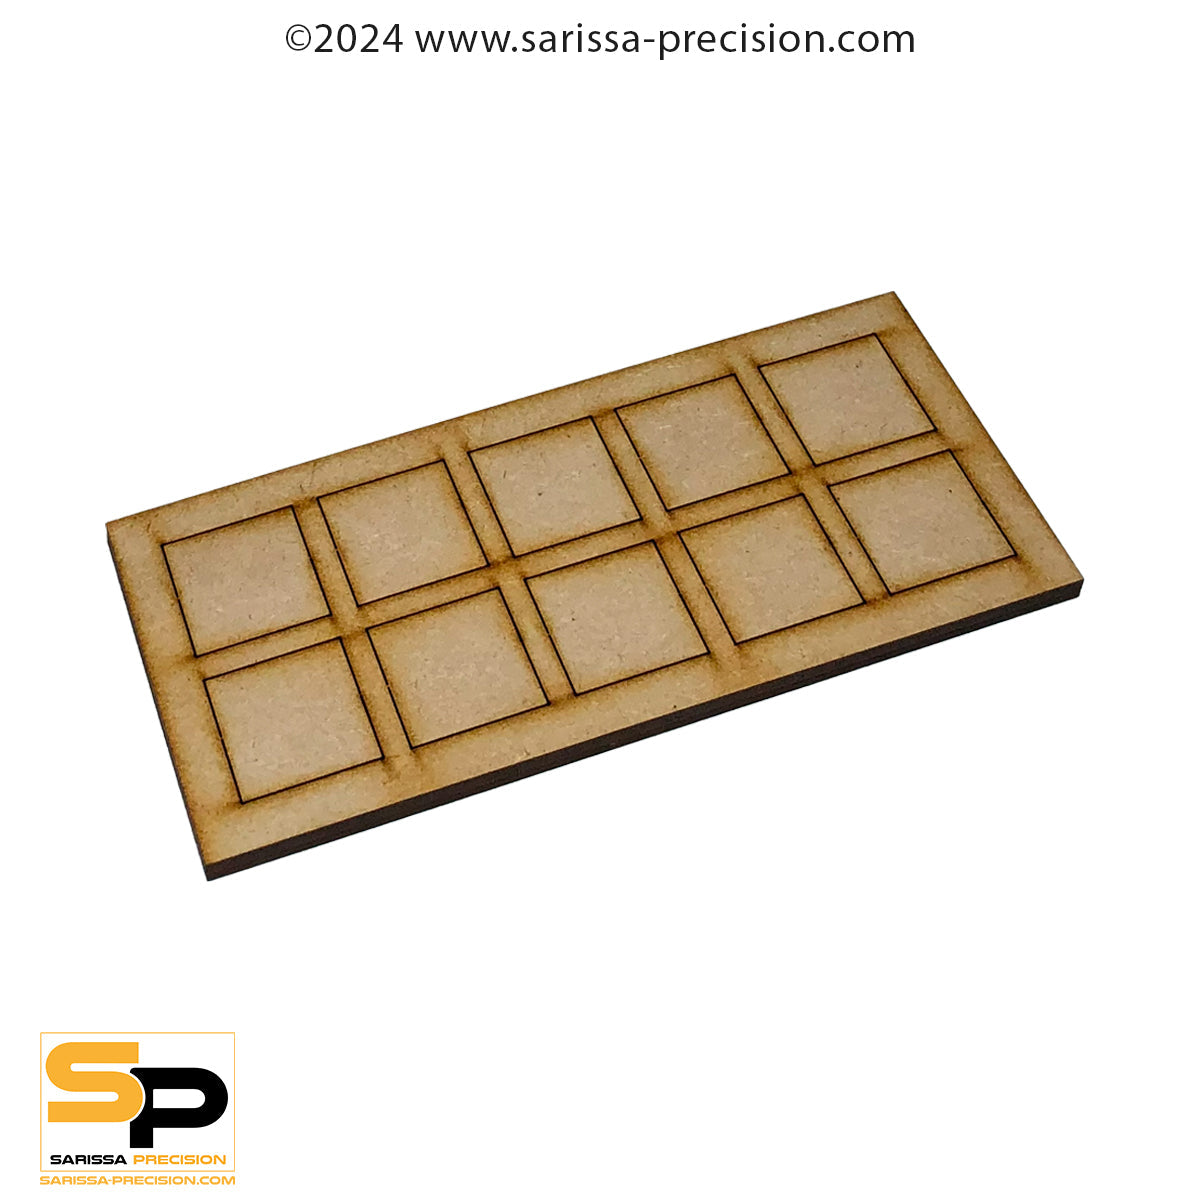 8x4 30x30mm Conversion Tray for 25x25mm bases